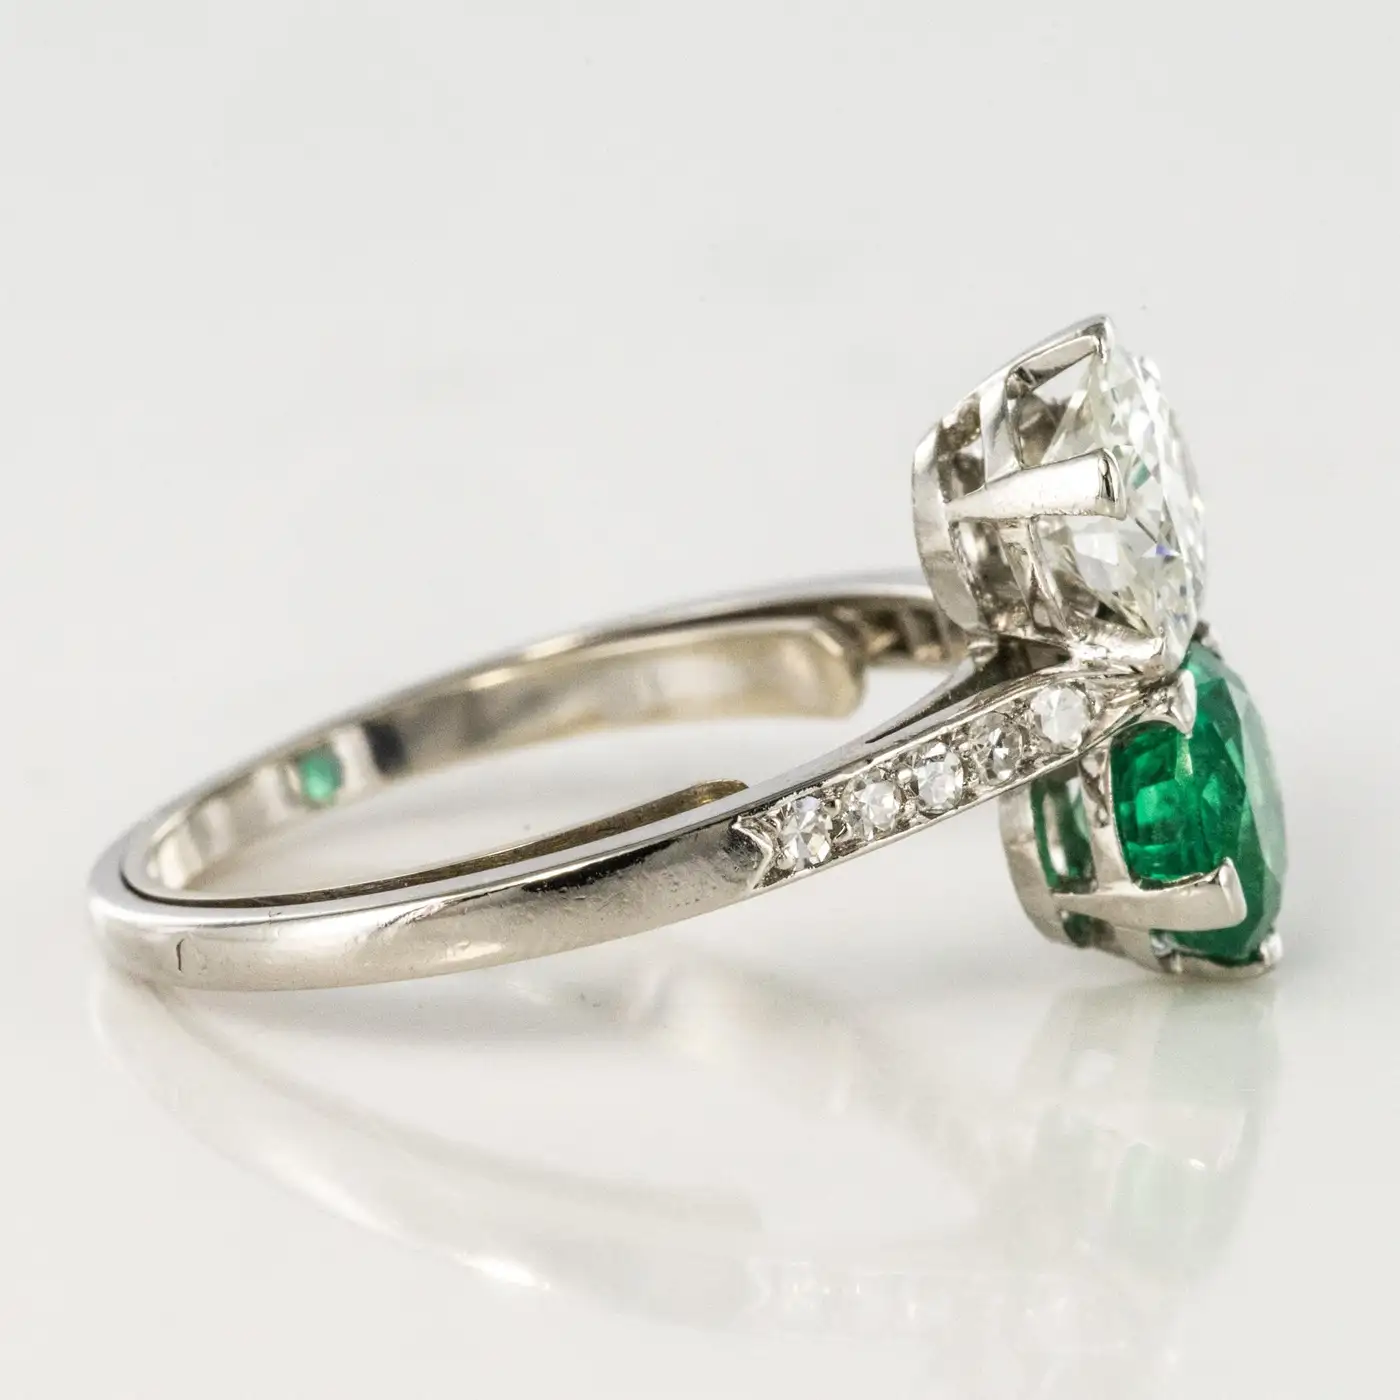 1930s-French-Platinum-Art-Deco-Emerald-Diamond-You-and-Me-Ring-14.webp